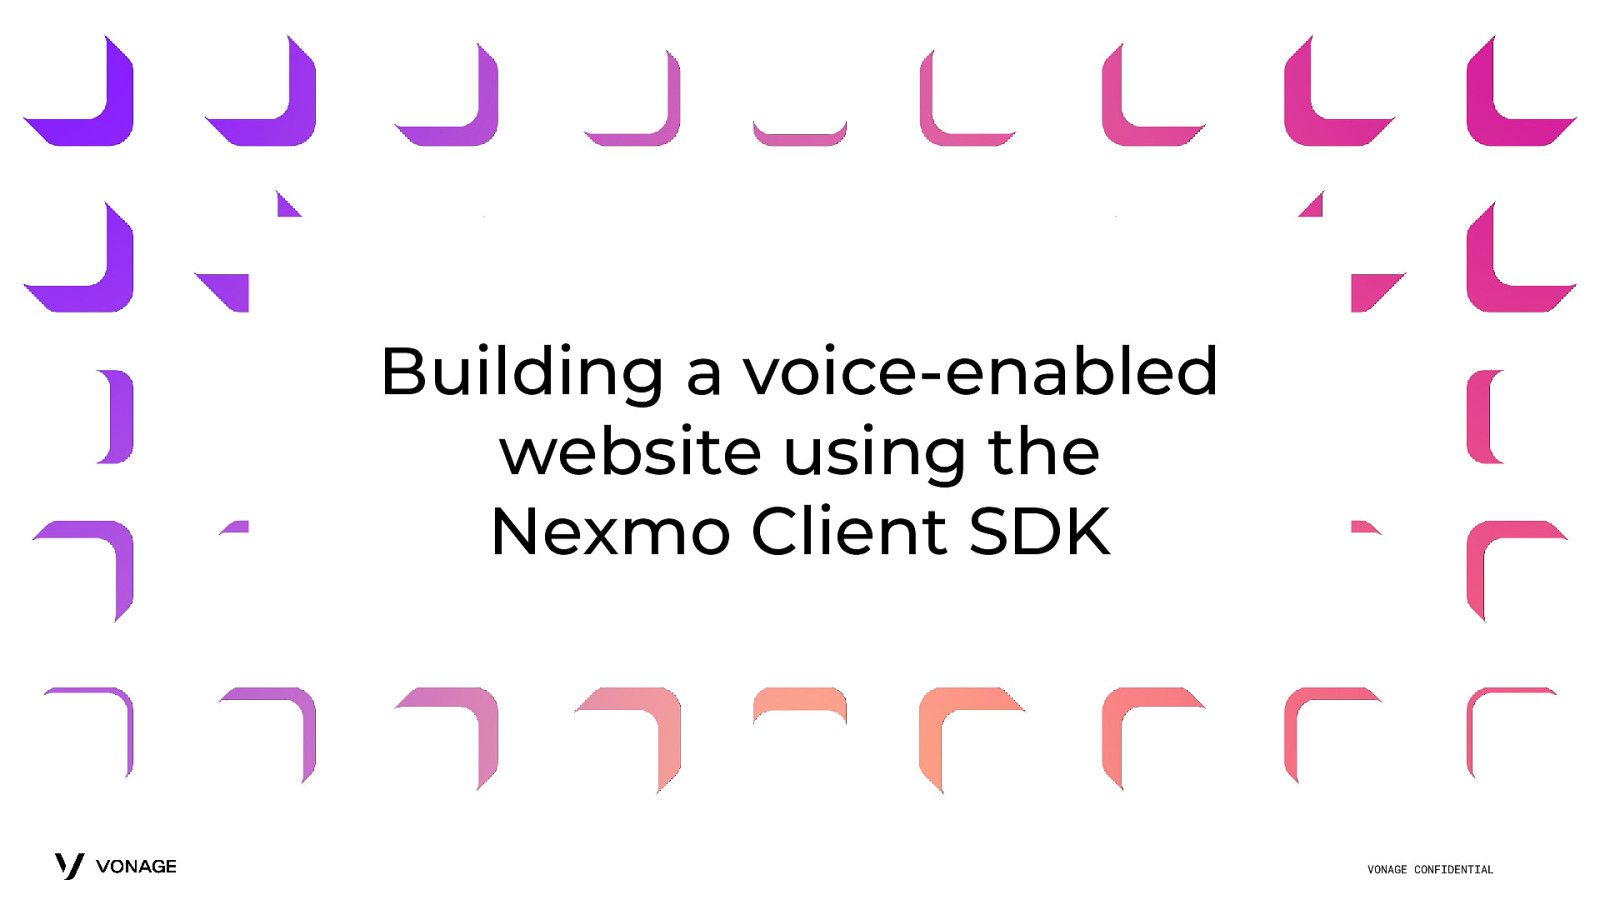 Building a voice-enabled website using the Nexmo Client SDK